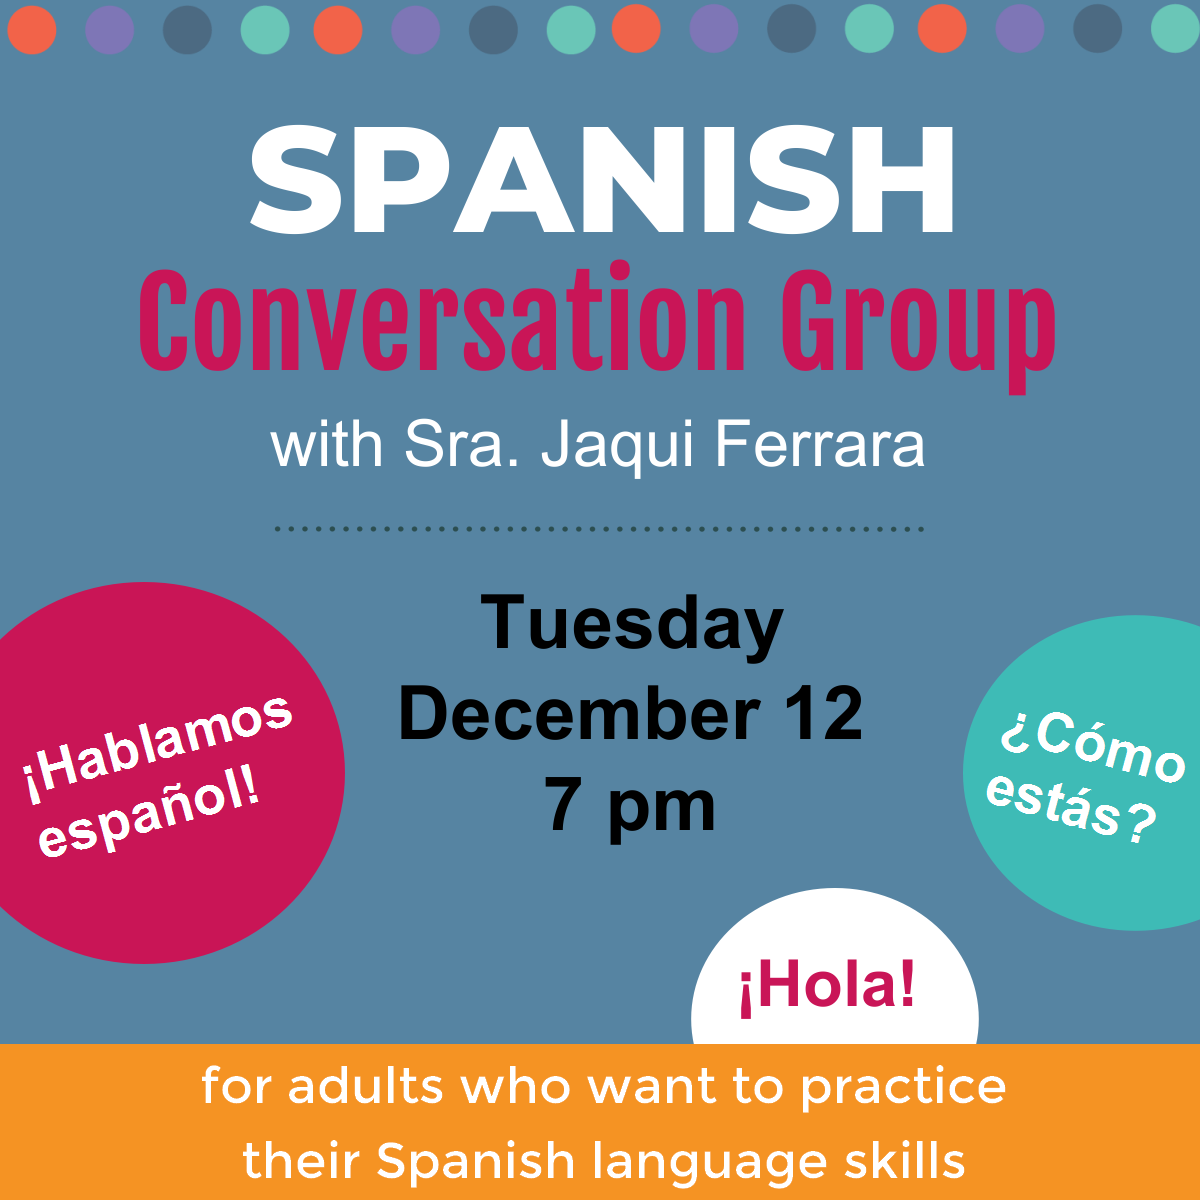 Spanish Conversation Group Tuesday, December 12, at 7 pm